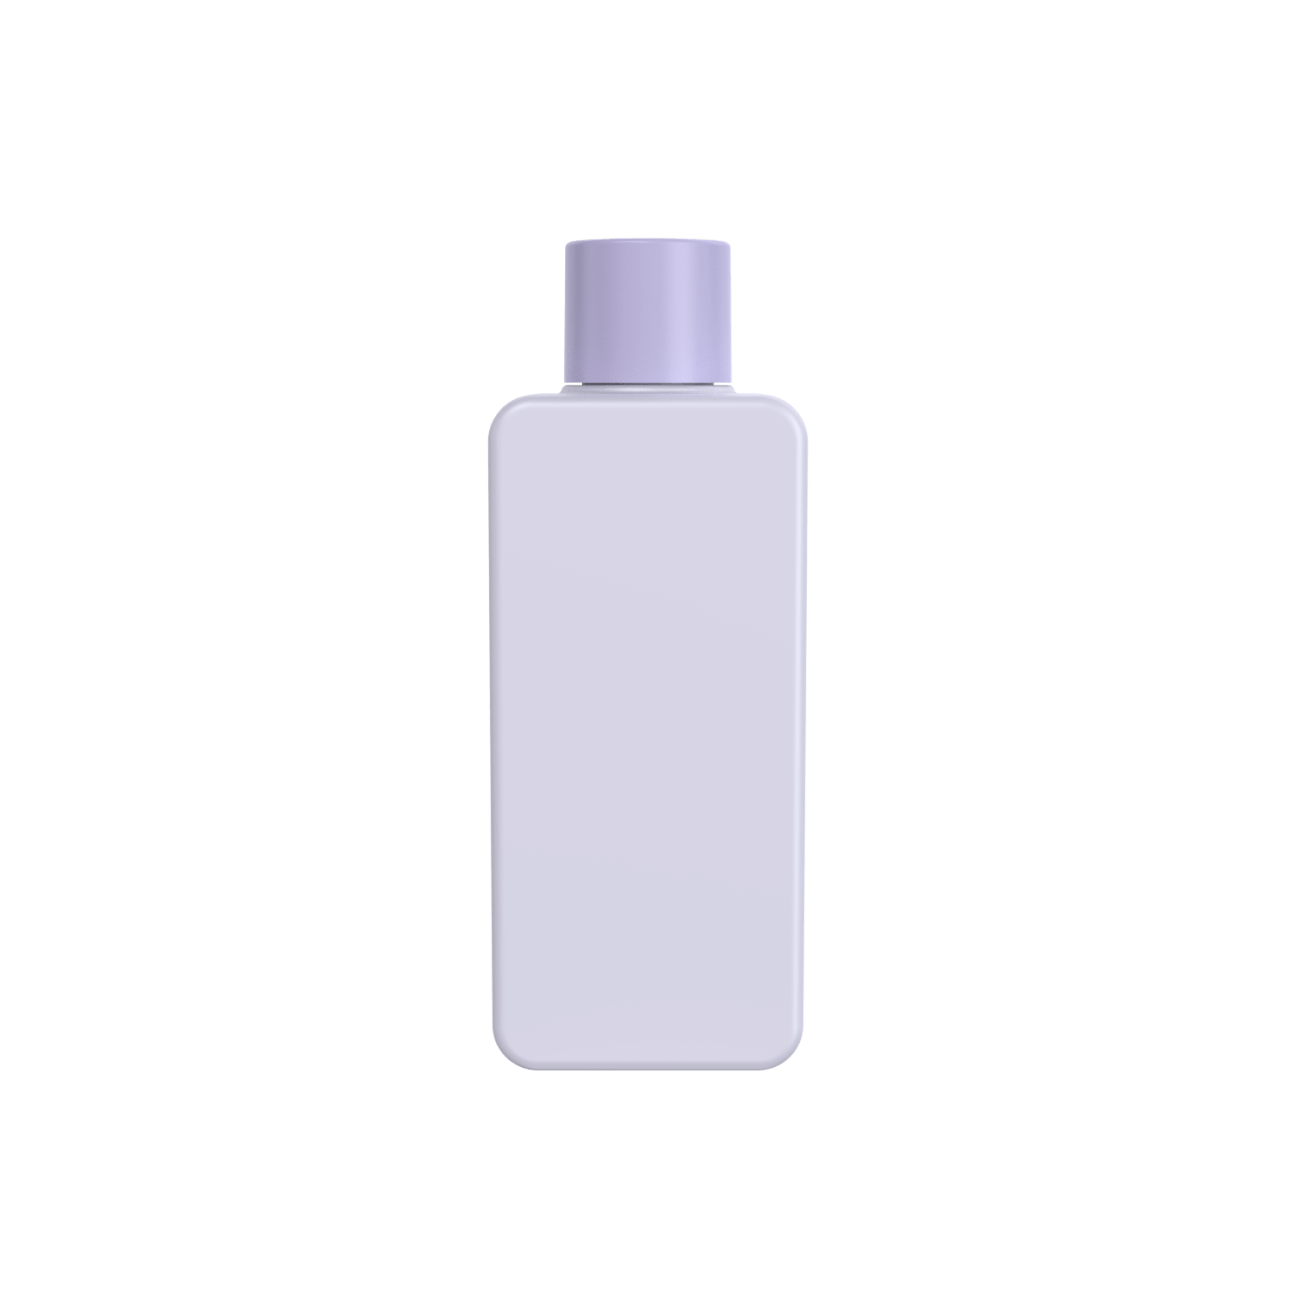 MB-Square EB with Screw cap-200ml's thumbnail image